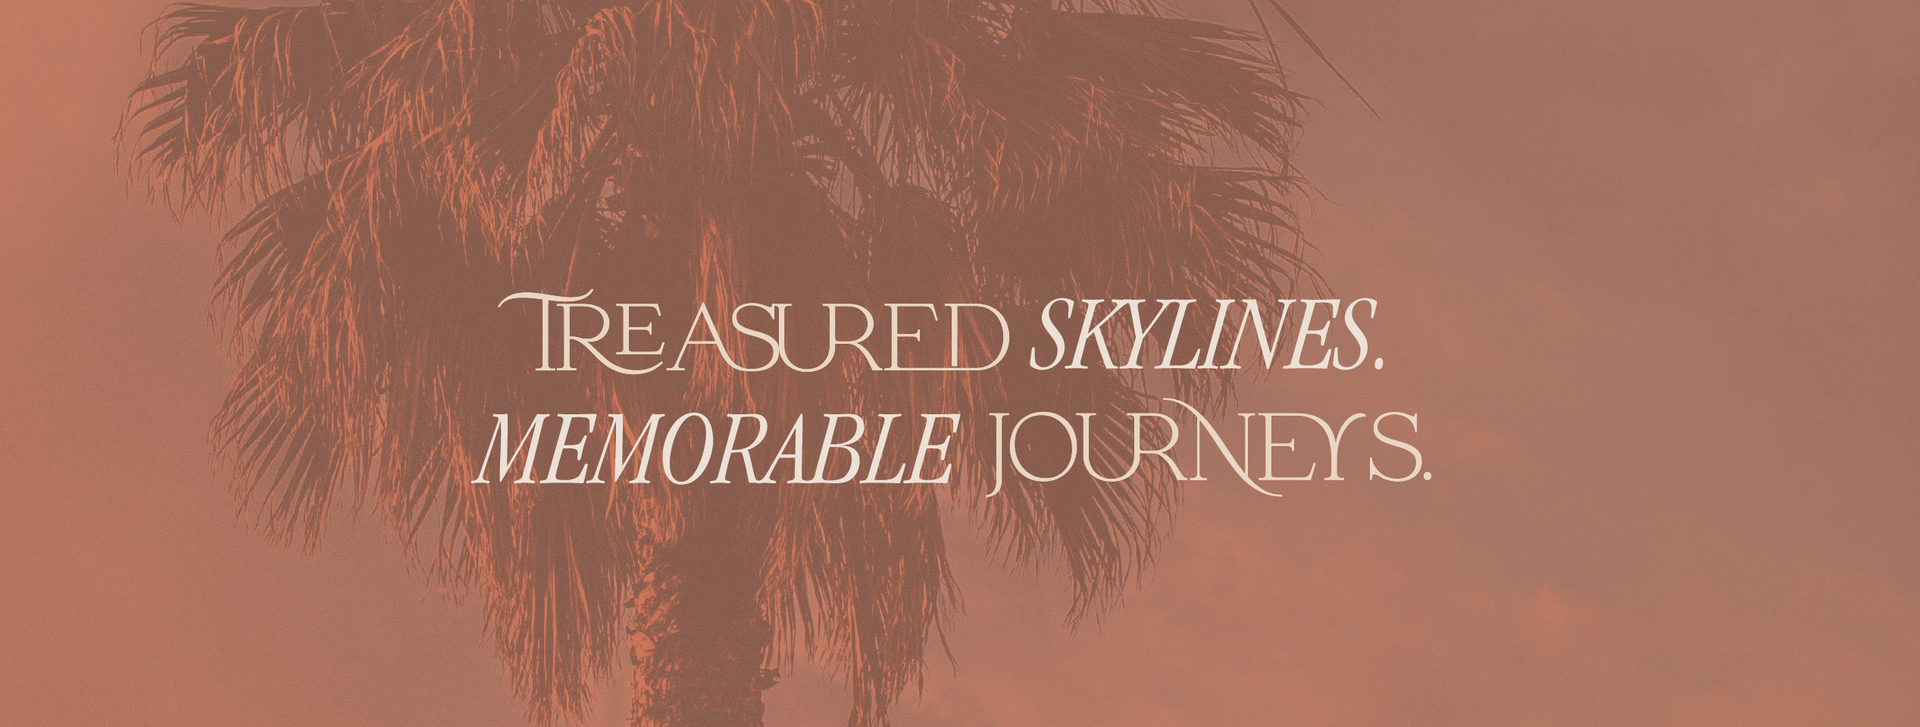 A picture of a palm tree with the words `` treasured skylines memorable journeys '' written on it.